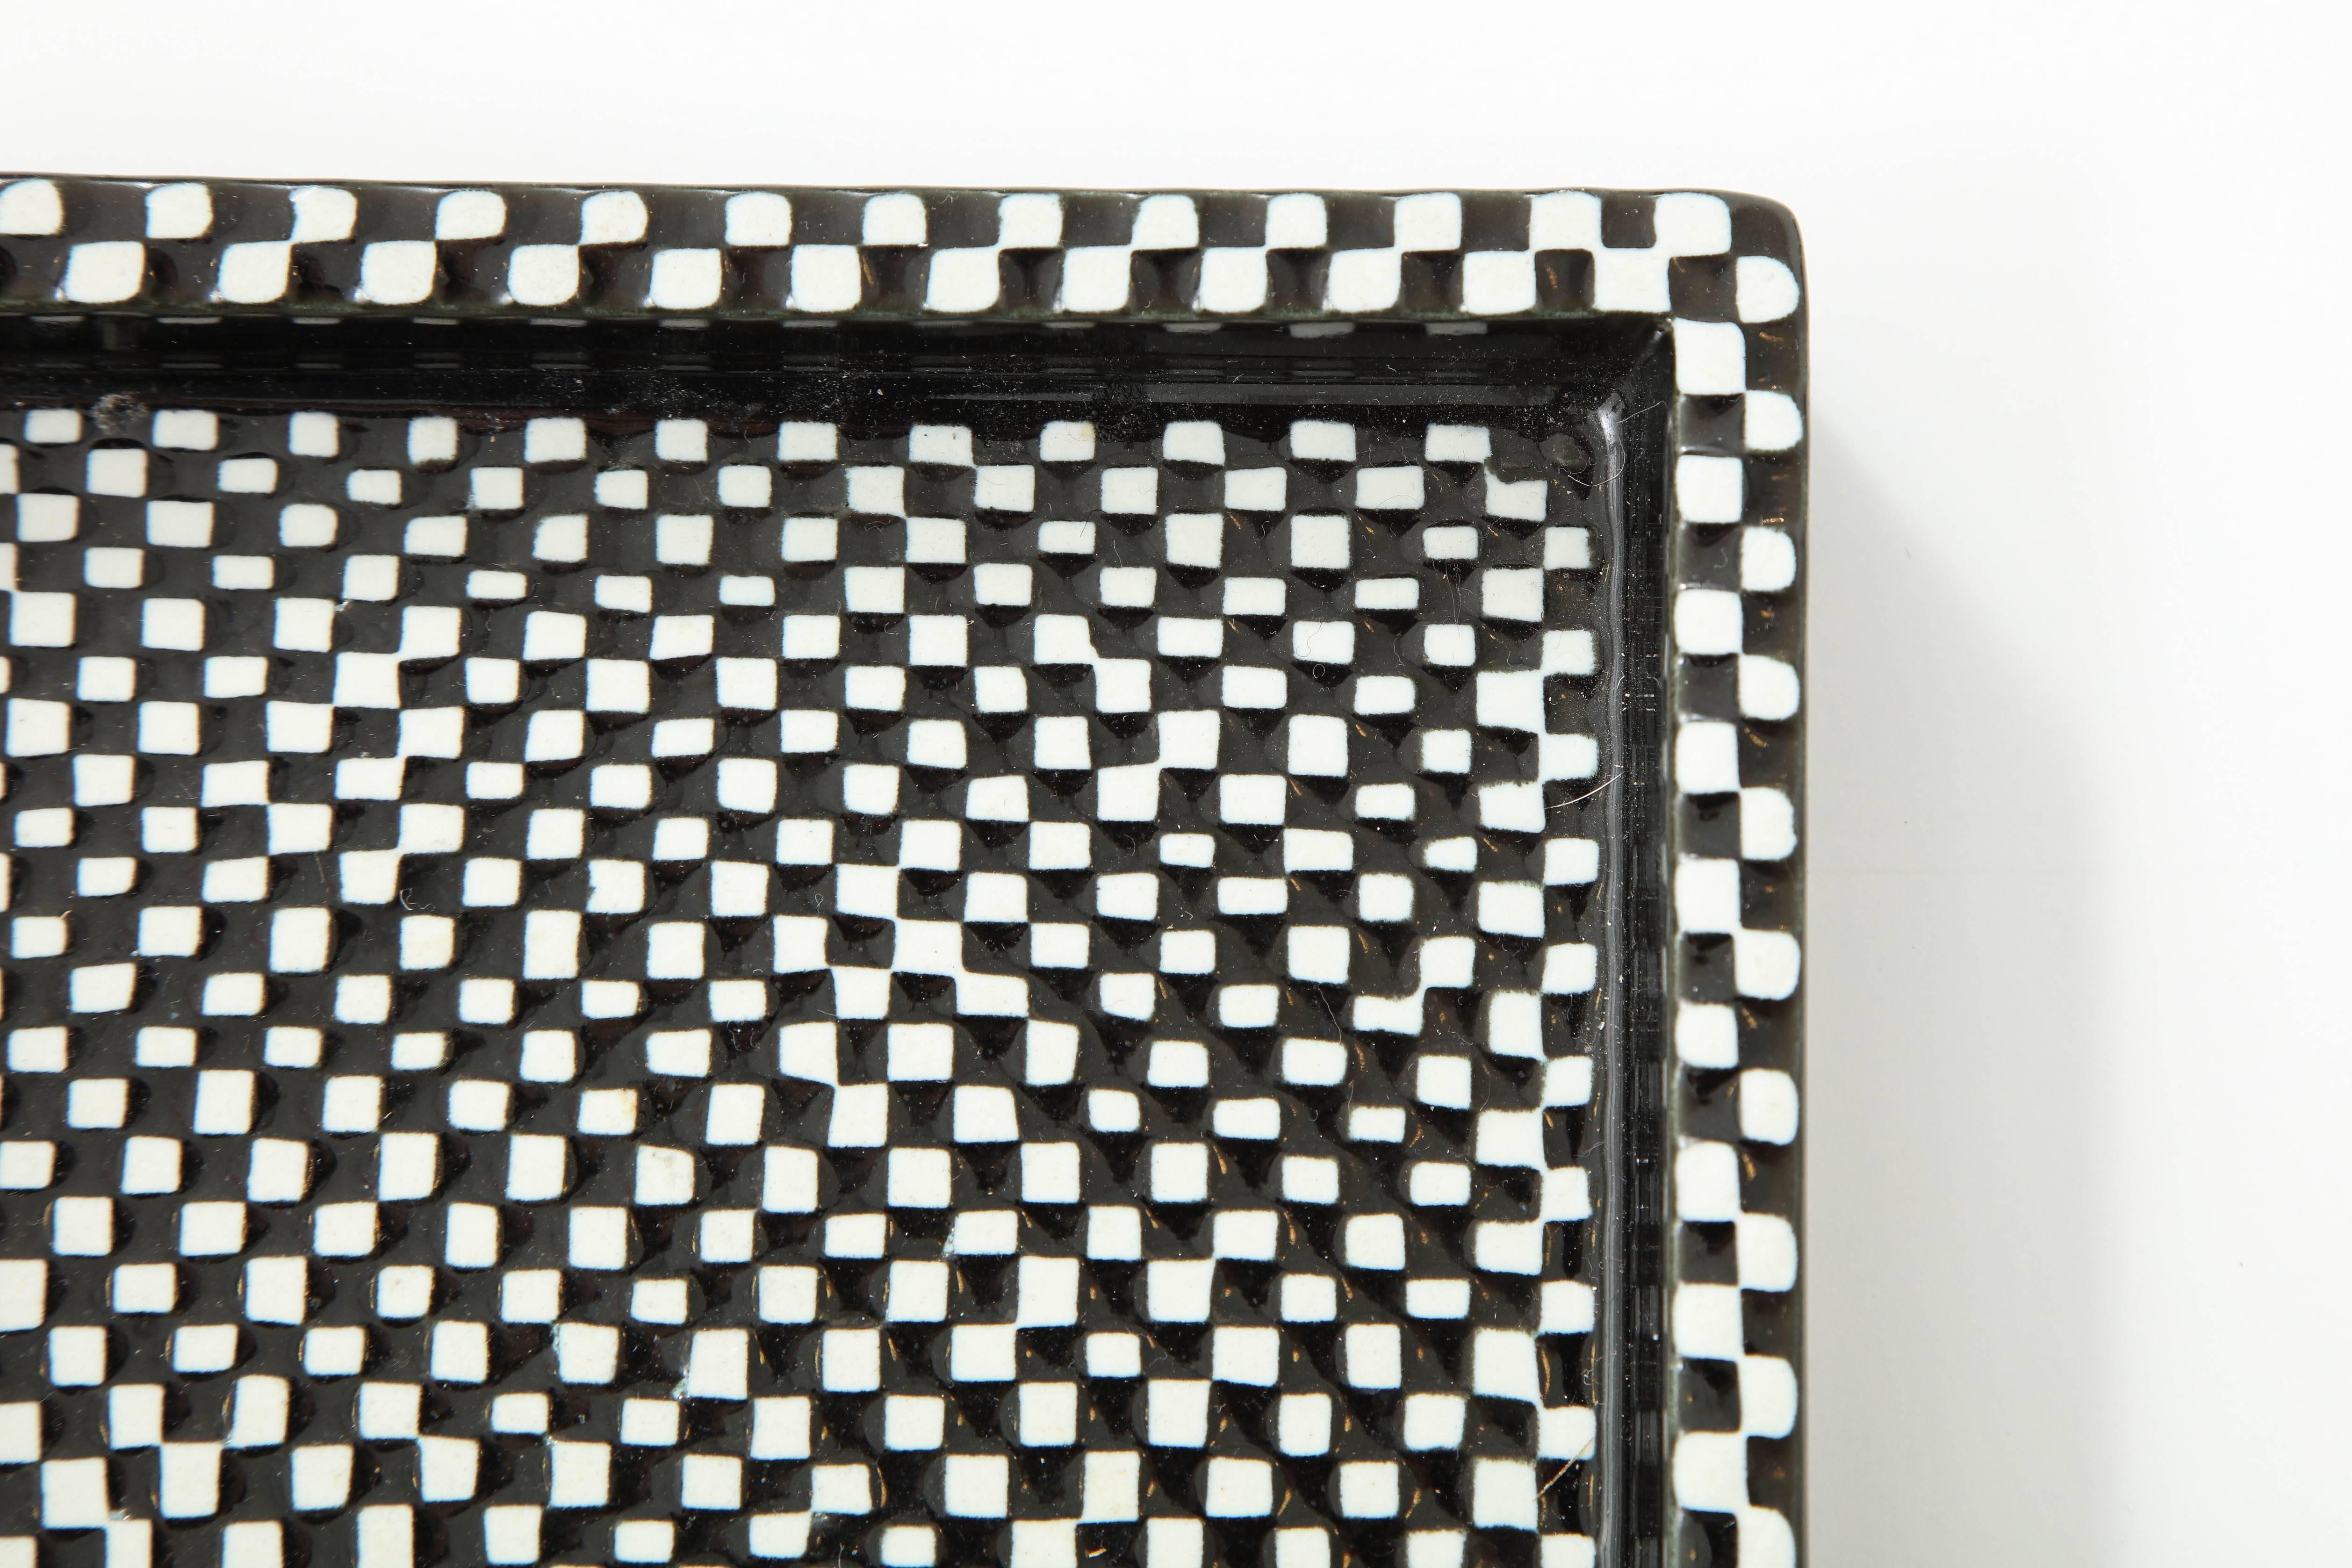 what is the black and white square pattern called